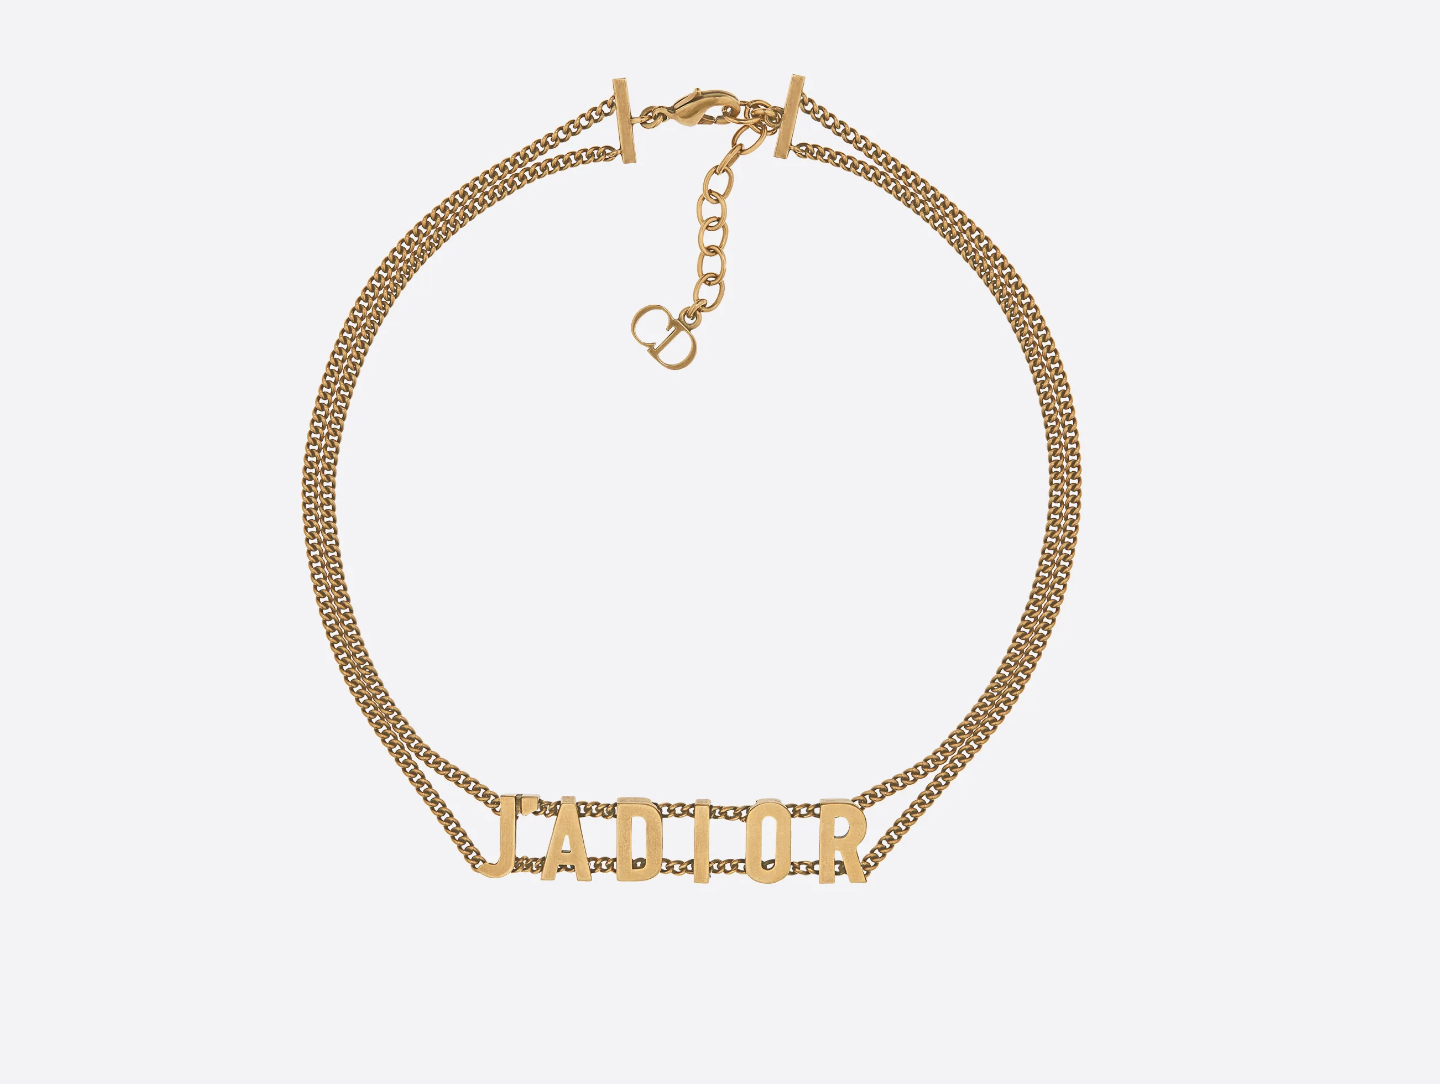 RESERVED - Dior J'adore gold necklace c.1990 - Katheley's